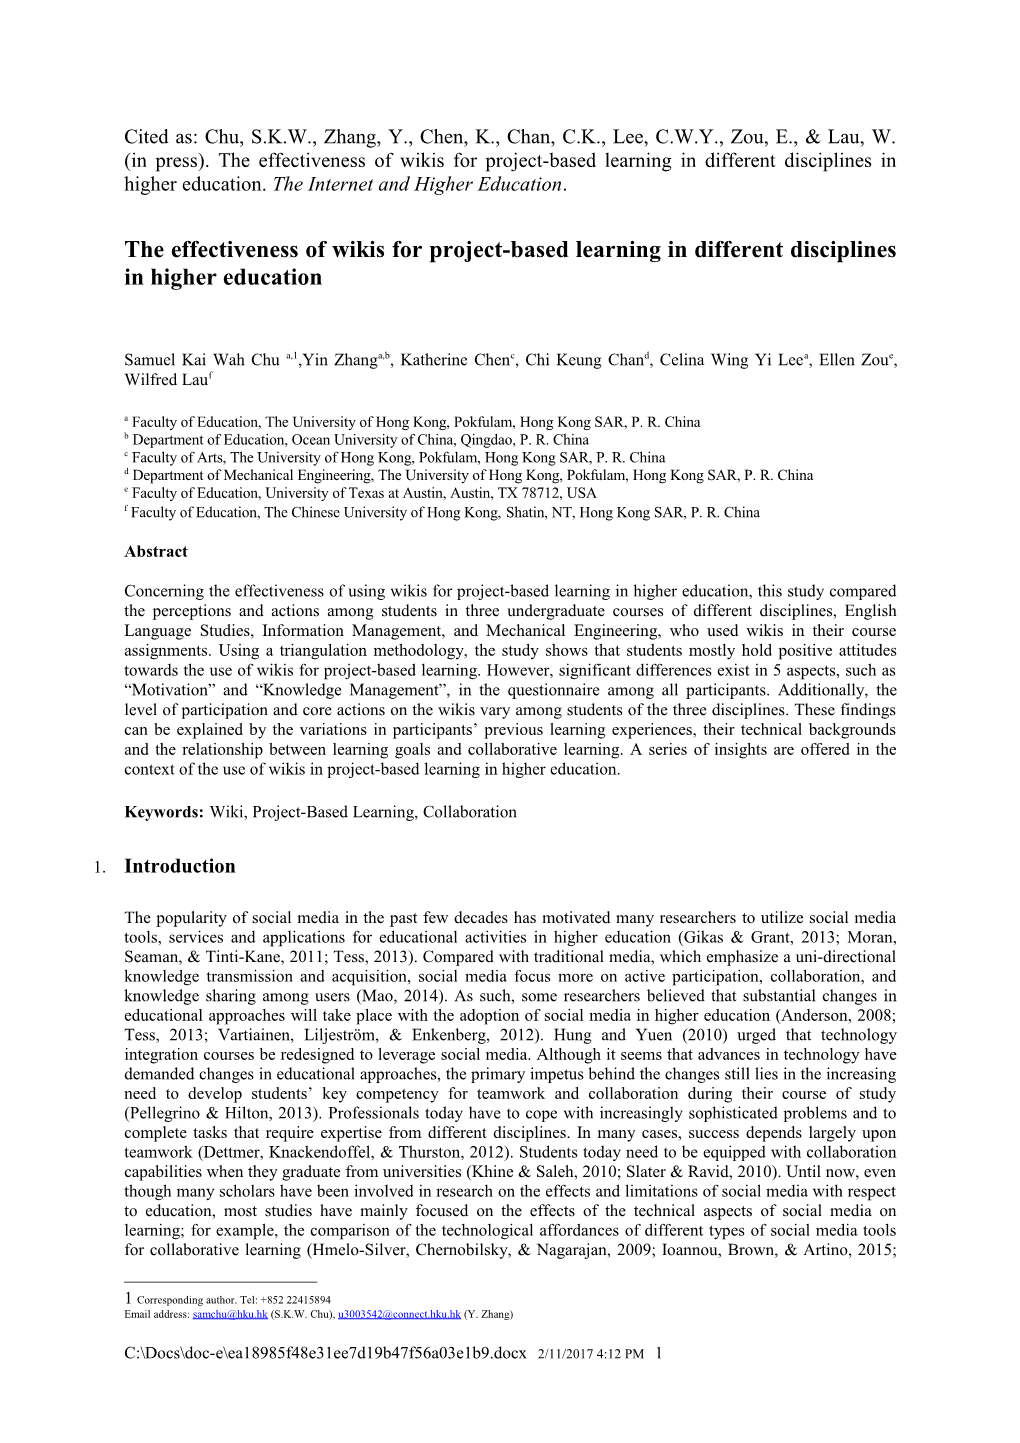 The Effectiveness of Wikis for Project-Based Learning in Different Disciplines in Higher